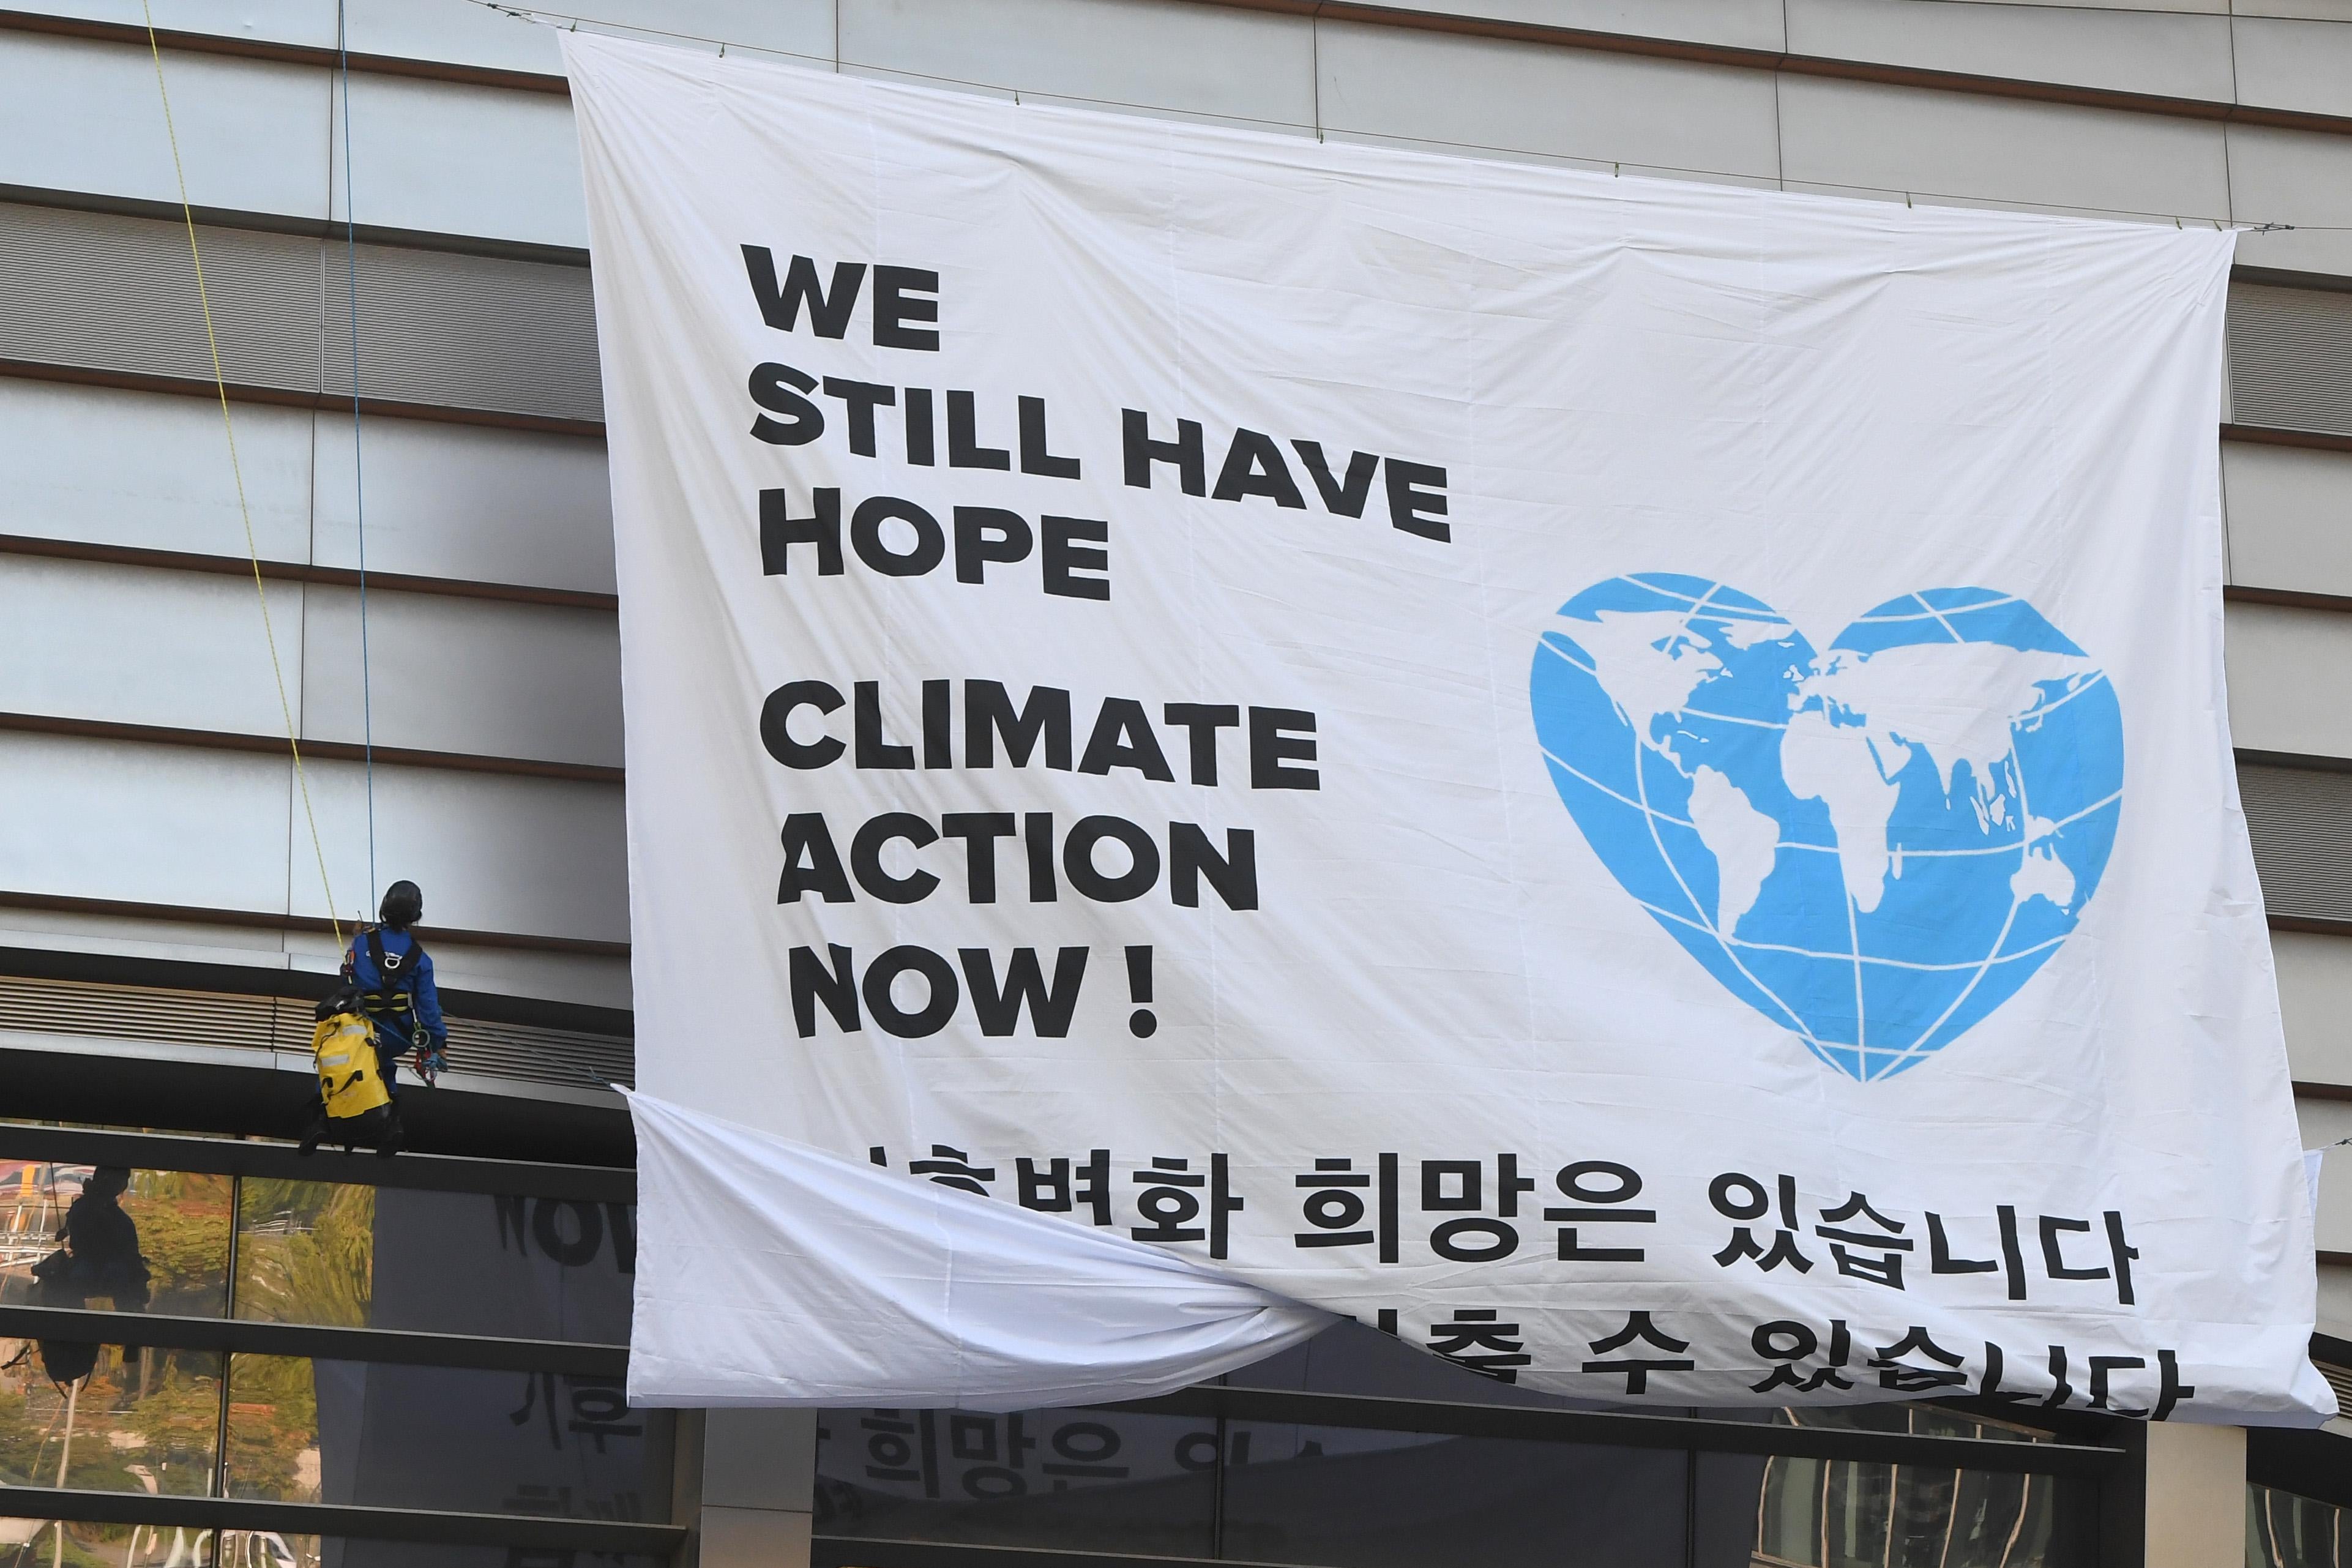 Greenpeace activists display a big banner reading "We still have hope, Climate action now!" during an activity prior to a press conference of the Intergovernmental Panel for Climate Change (IPCC) at Songdo Convensia in Incheon on October 8, 2018. 